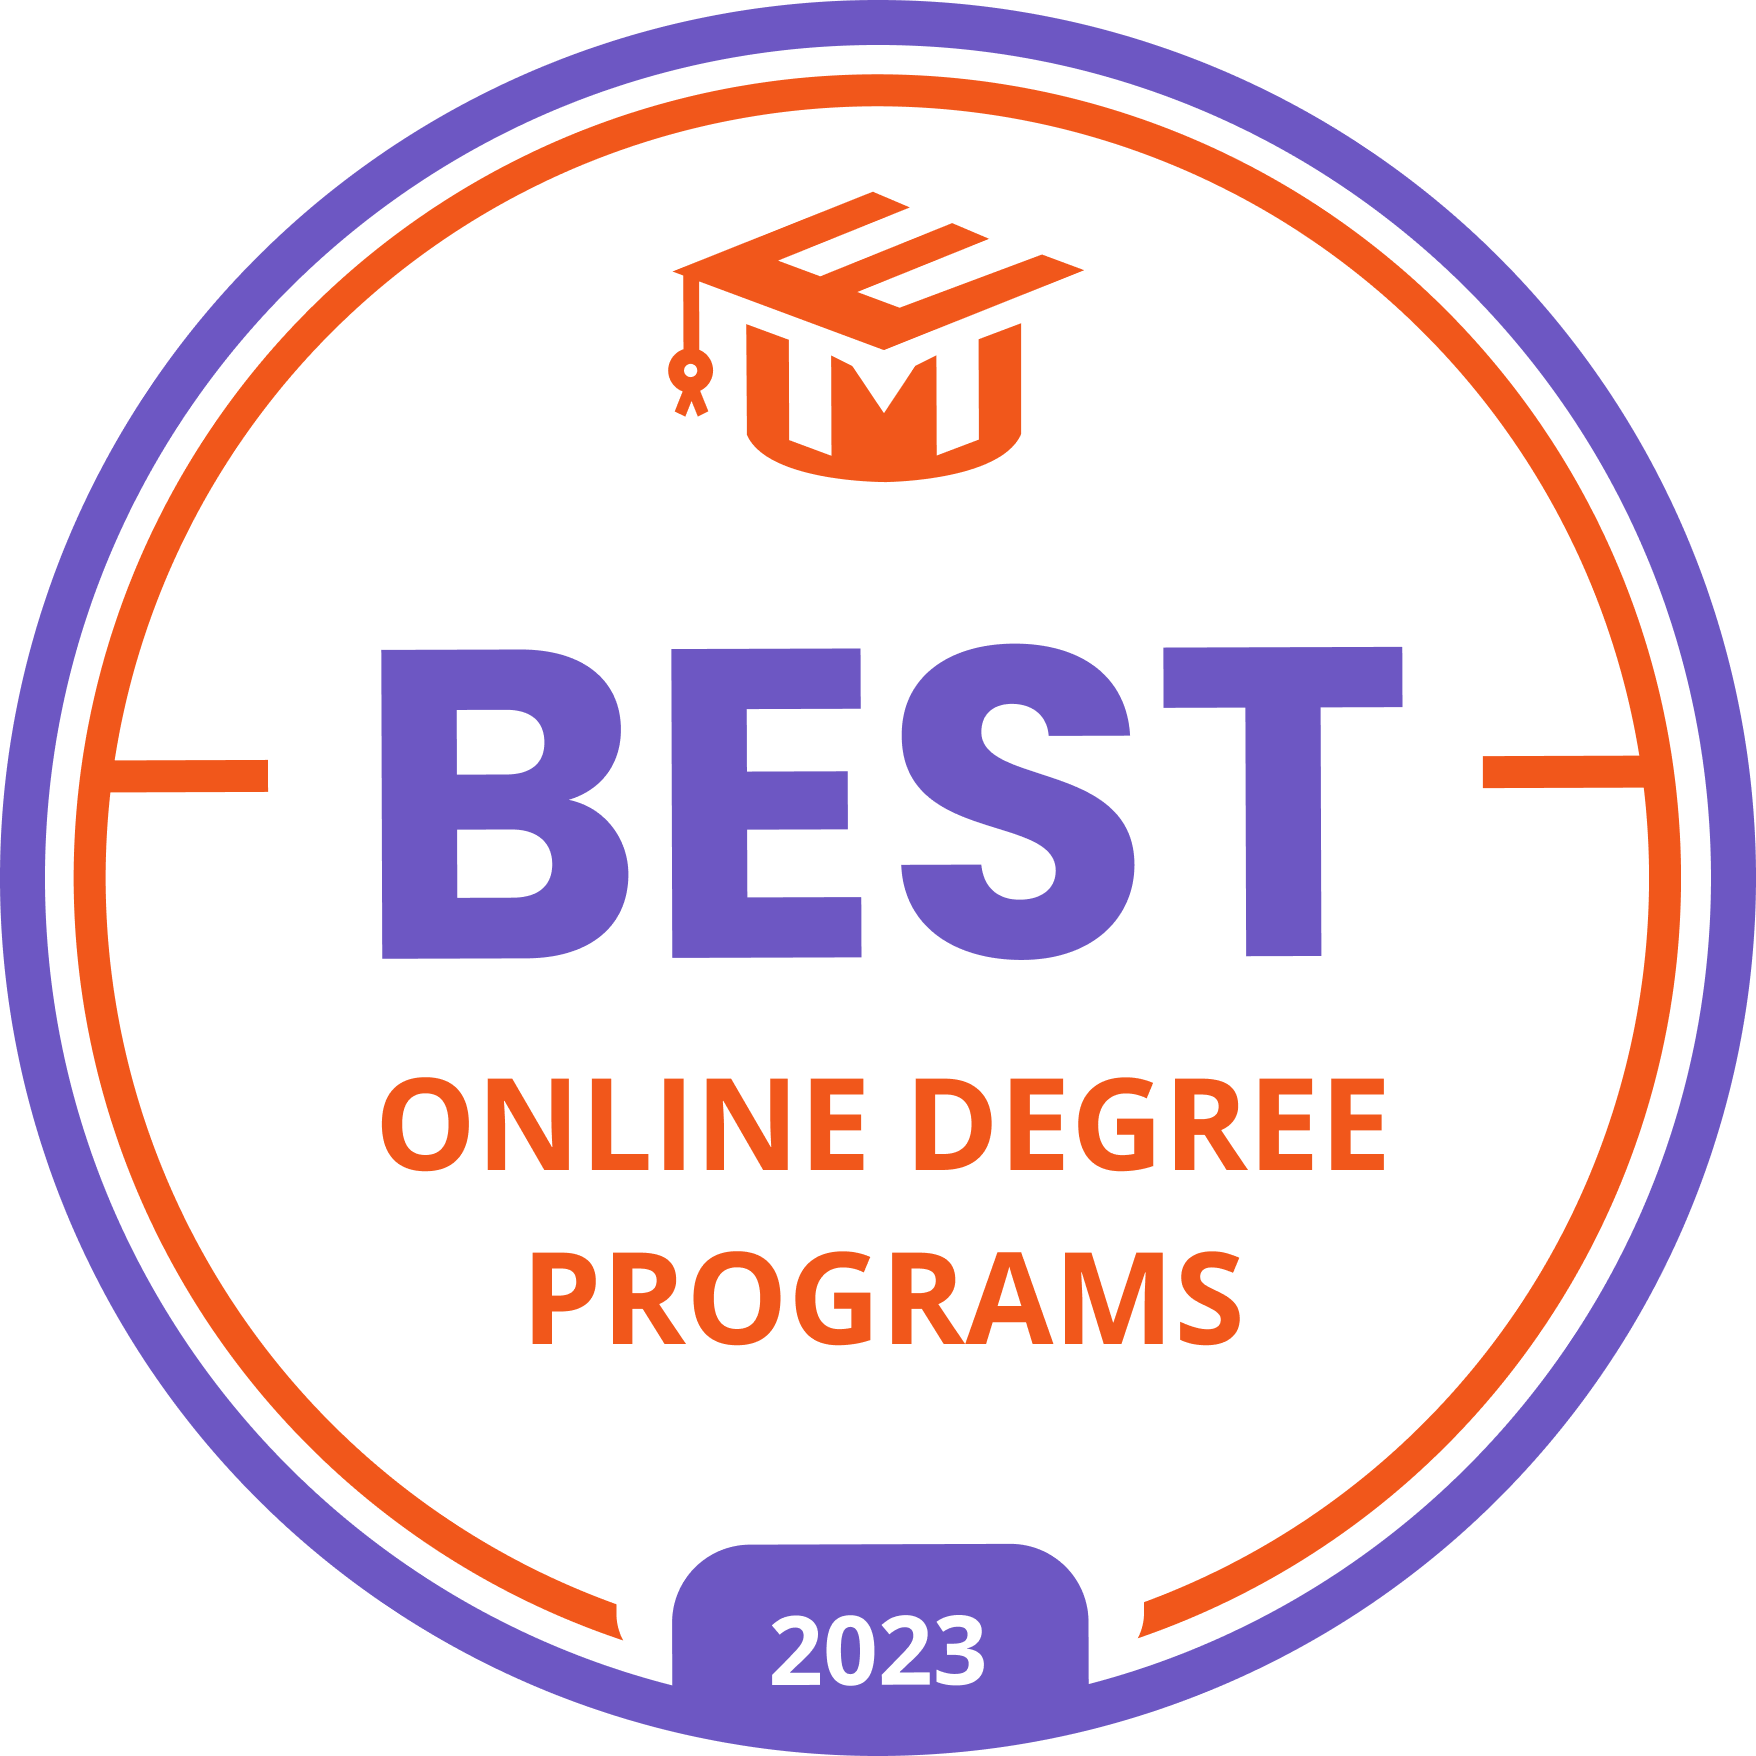 UNC GREENSBORO GERONTOLOGY PROGRAM EARNED TOP HONORS AS ONE OF THE BEST ONLINE DEGREE PROGRAMS